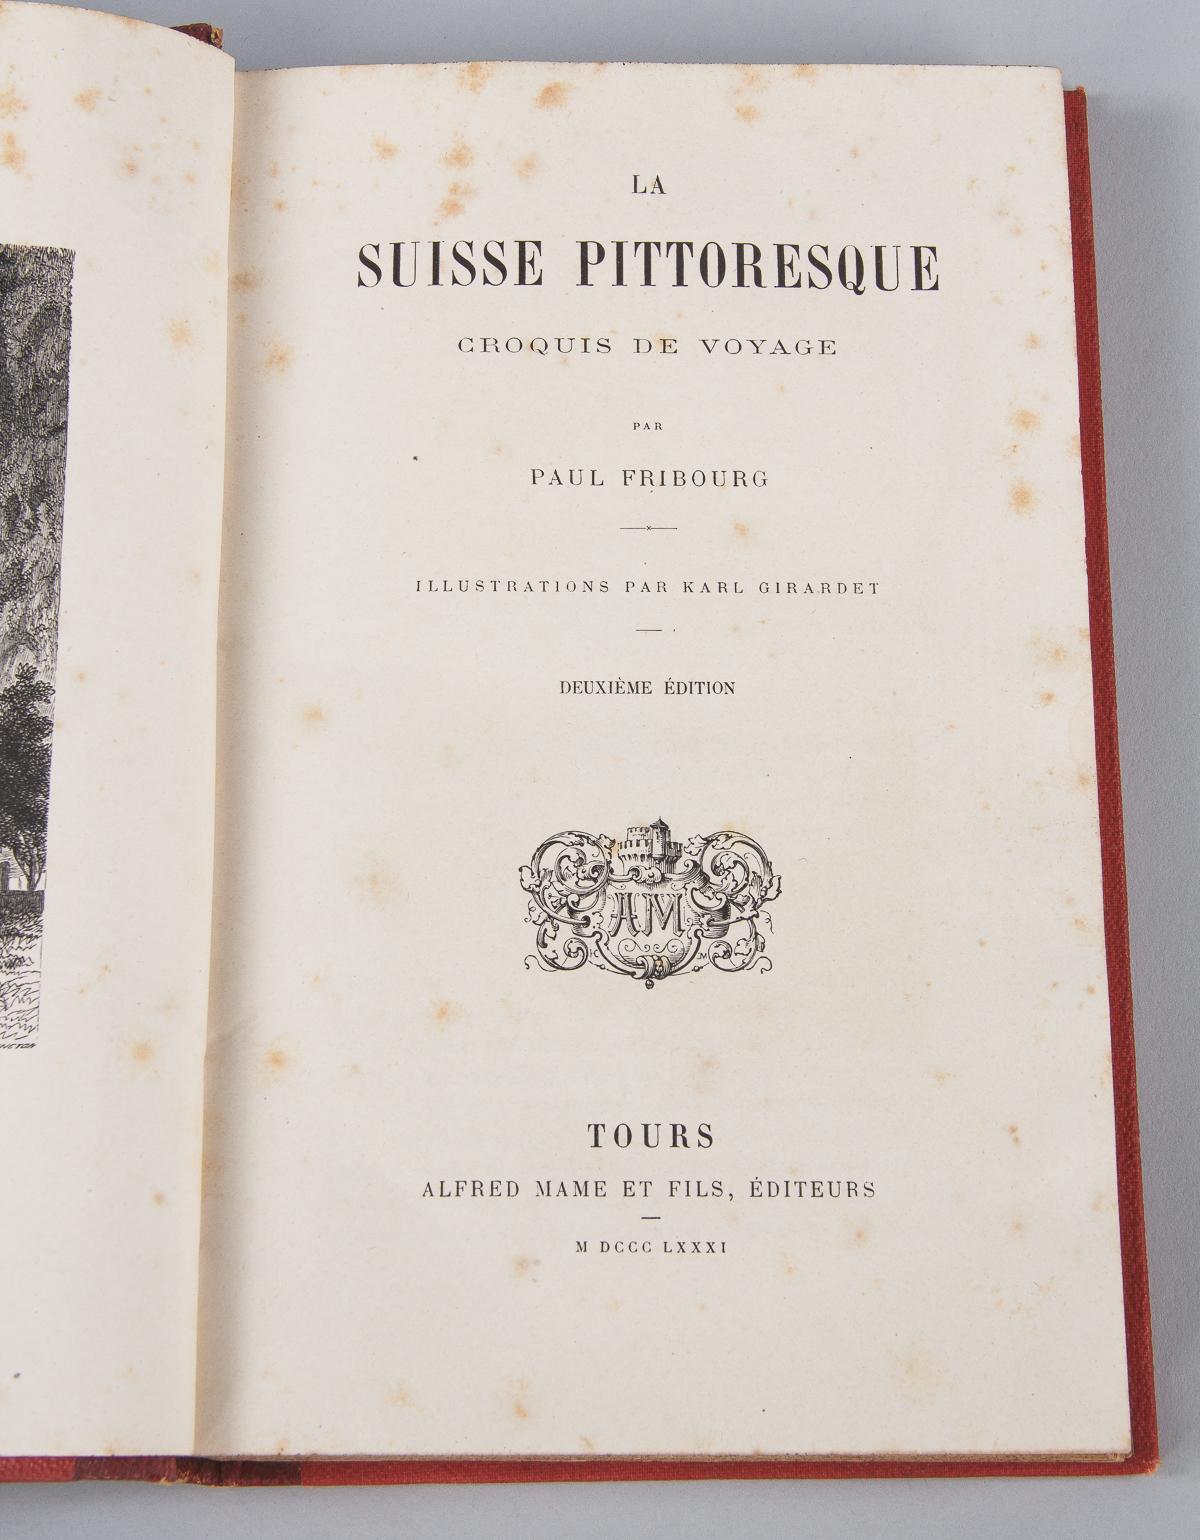 French Travel Guide Book La Suisse Pittoresque by Paul Fribourg, 1881 6